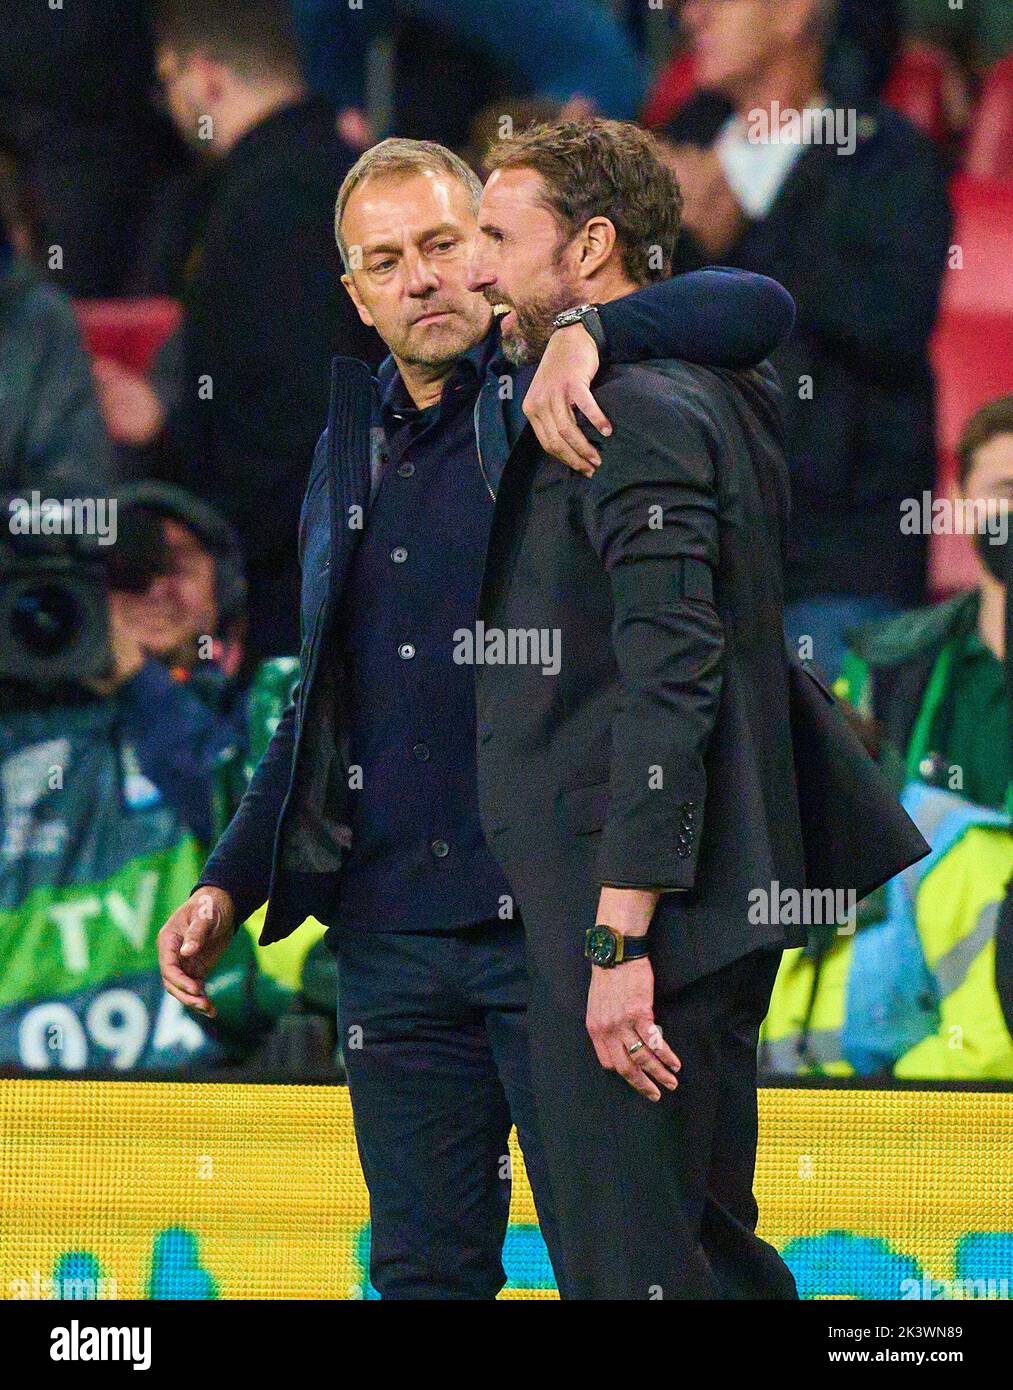 DFB headcoach Hans-Dieter Hansi Flick , Bundestrainer, Nationaltrainer, Gareth Southgate, head coach England, hug each other after the UEFA Nations League 2022 match  ENGLAND - GERMANY 3-3  in Season 2022/2023 on Sept 26, 2022  in London, Great Britain.  © Peter Schatz / Alamy Live News Stock Photo